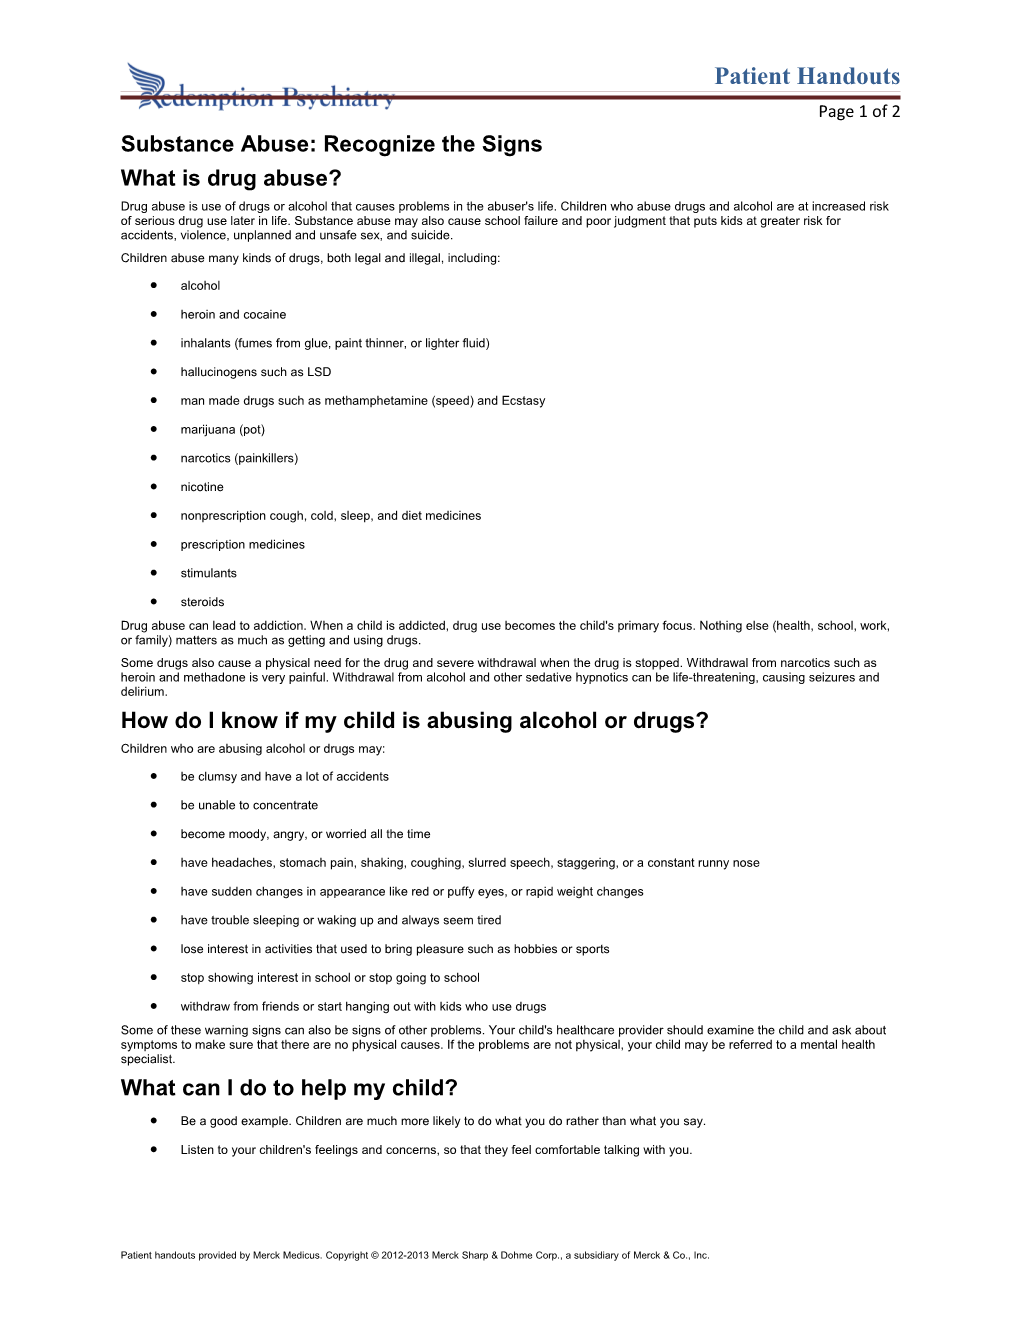 Substance Abuse: Recognize the Signs